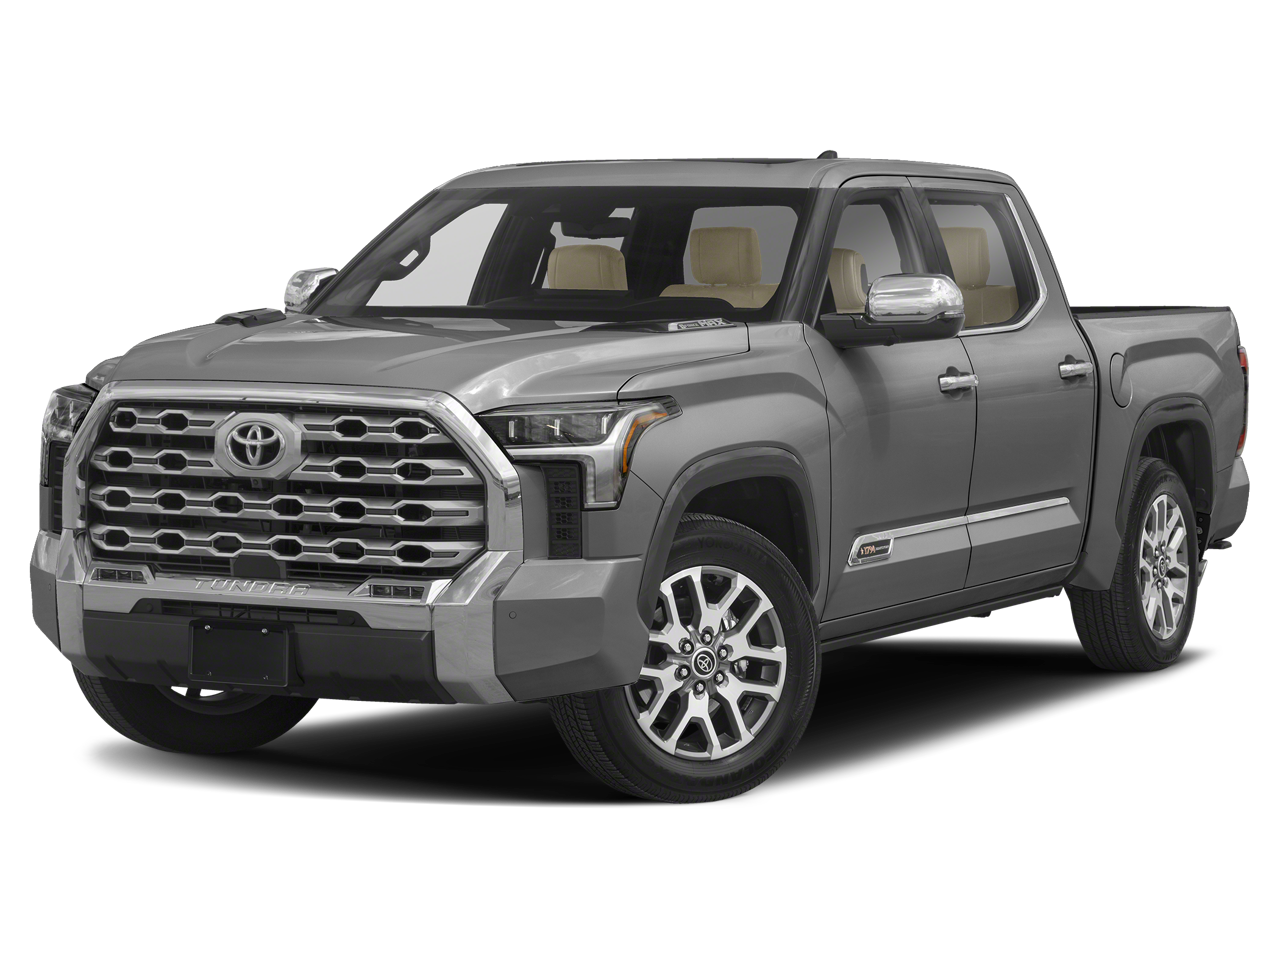 2021 Toyota Tundra Review | Fremont Motor Company Wyoming